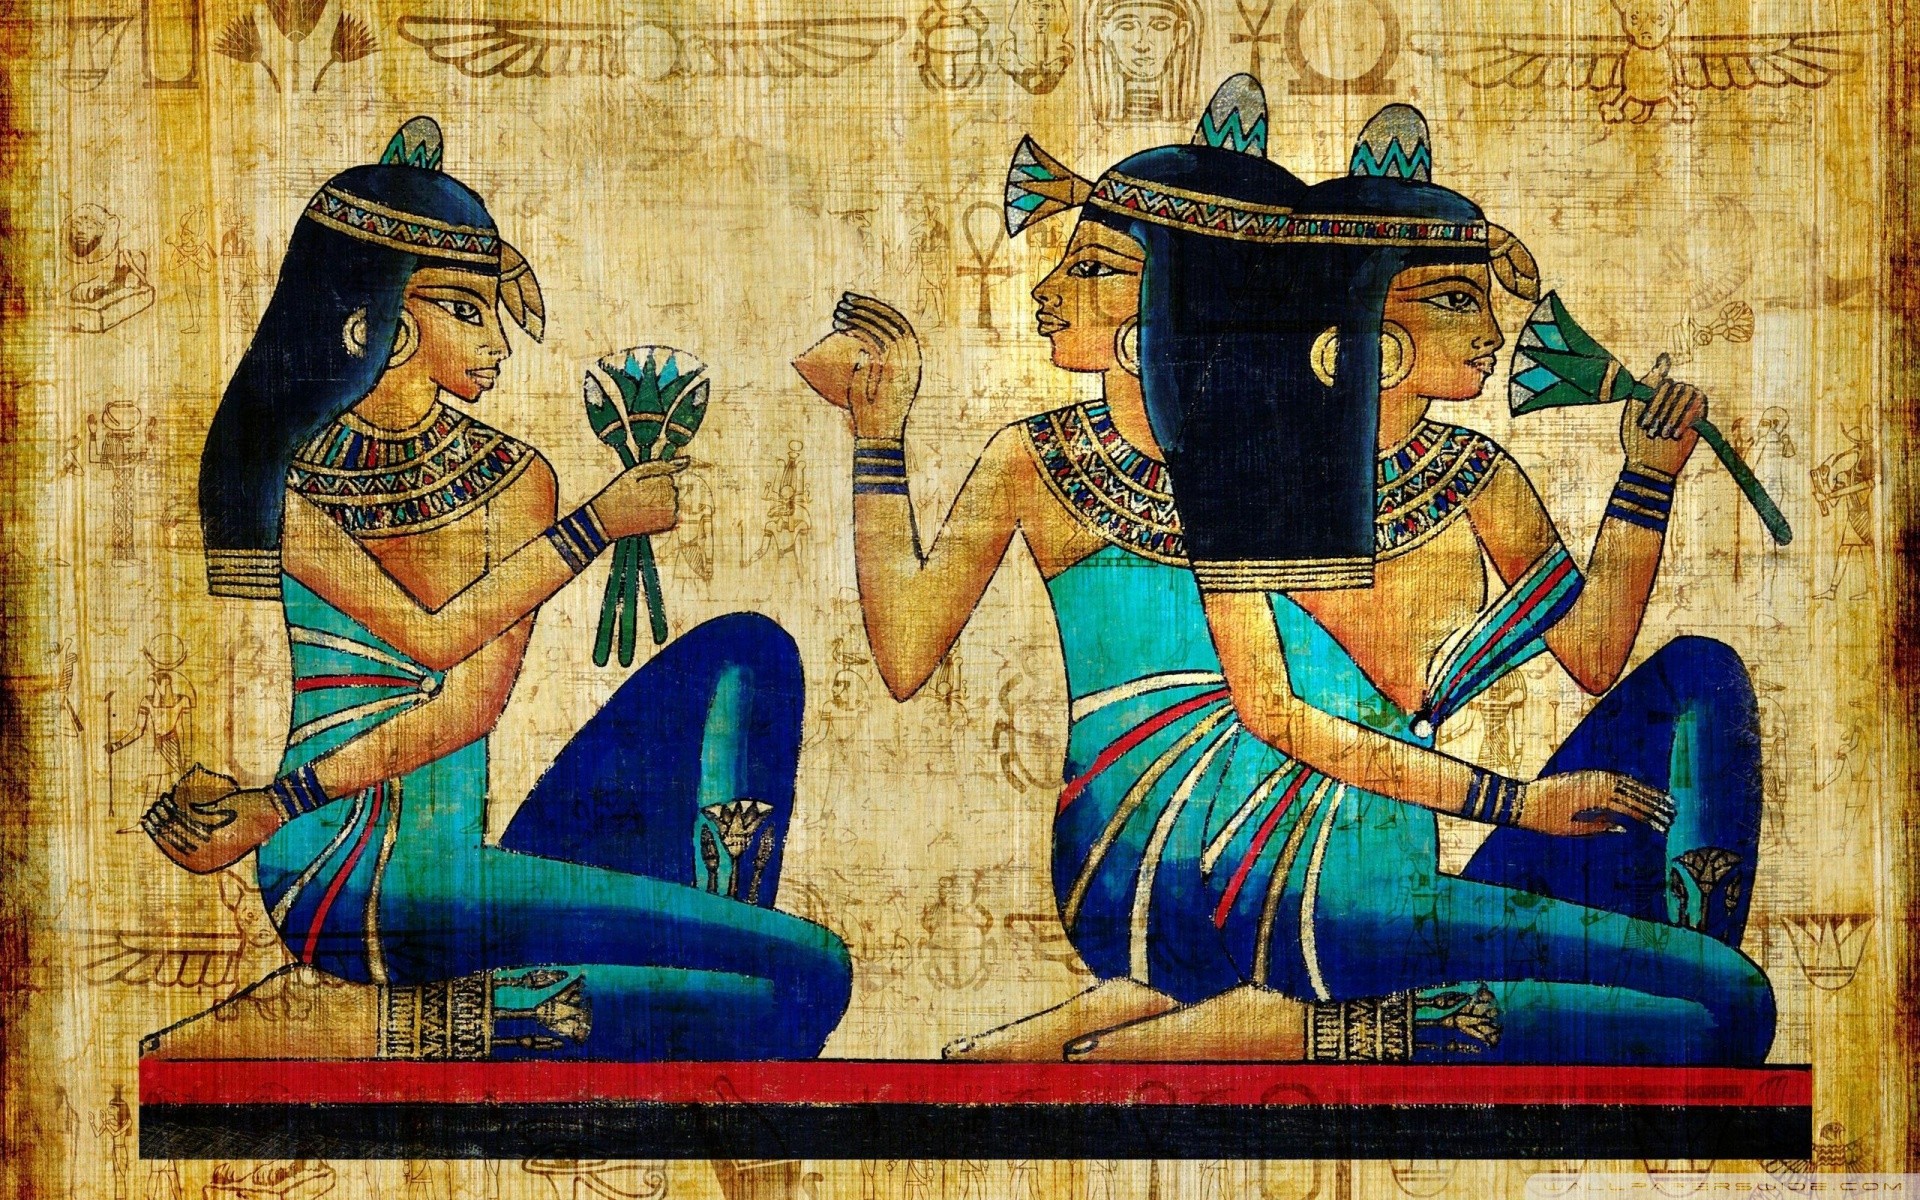 48 Egyptian Wallpaper For Home On Wallpapersafari Images, Photos, Reviews